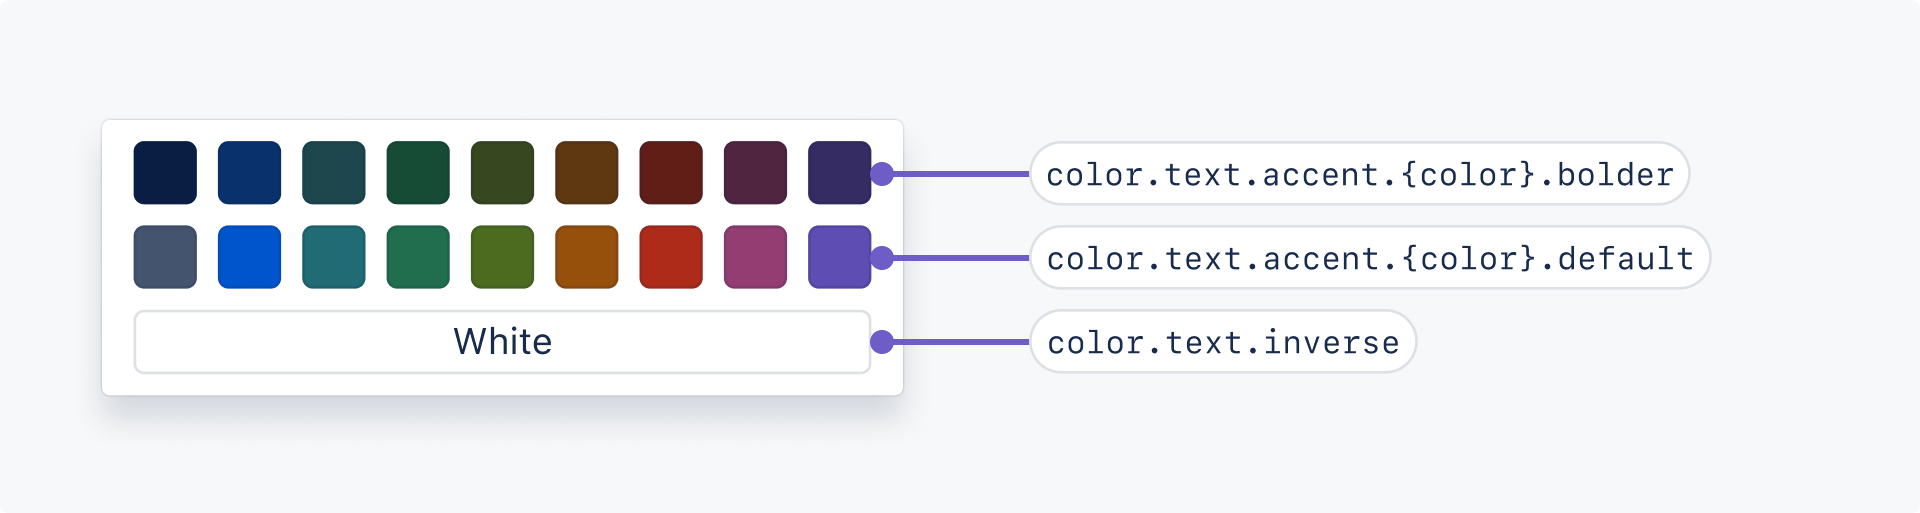 A text color picker with two shades per color. There is a label pointing to each shade of purple as well as the white color option. From most bold to subtle, the labels say color.text.accent.purple.bolder, color.text.accent.purple.default, and color.text.inverse.